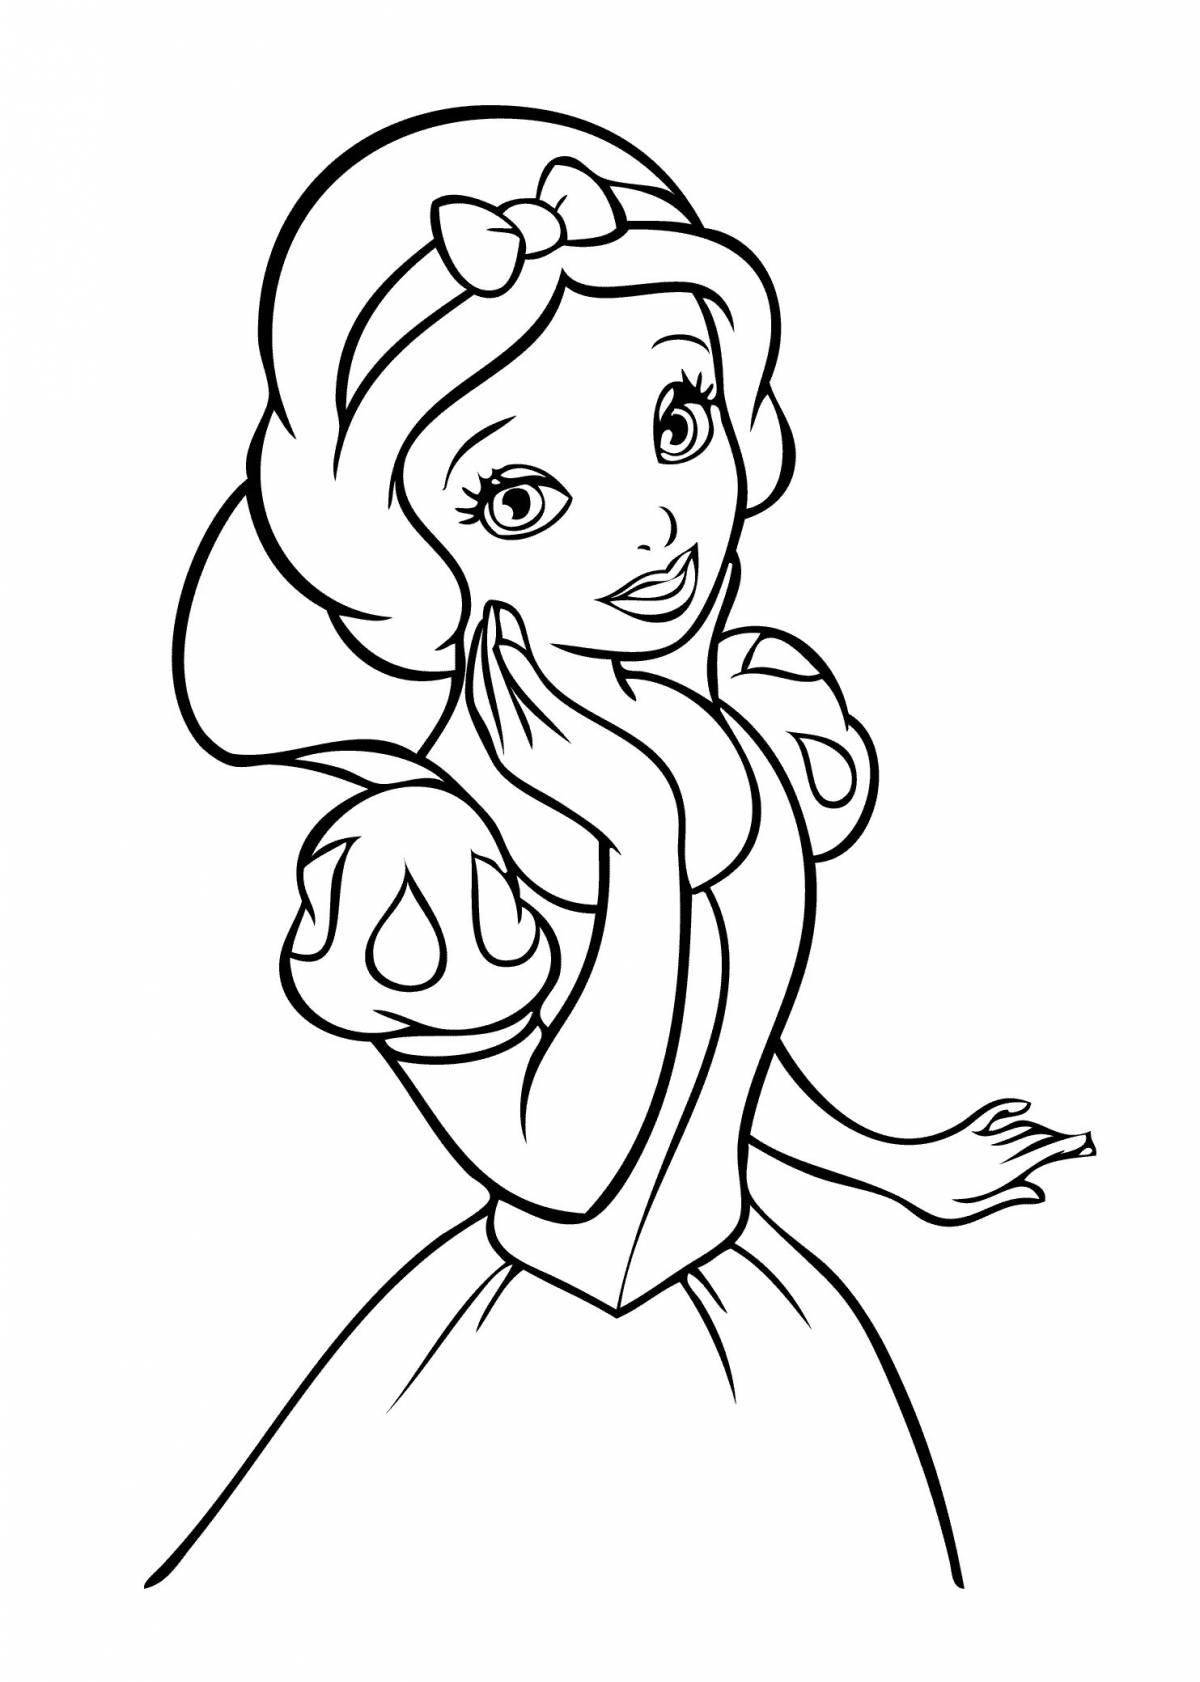 Amazing coloring page include princesses